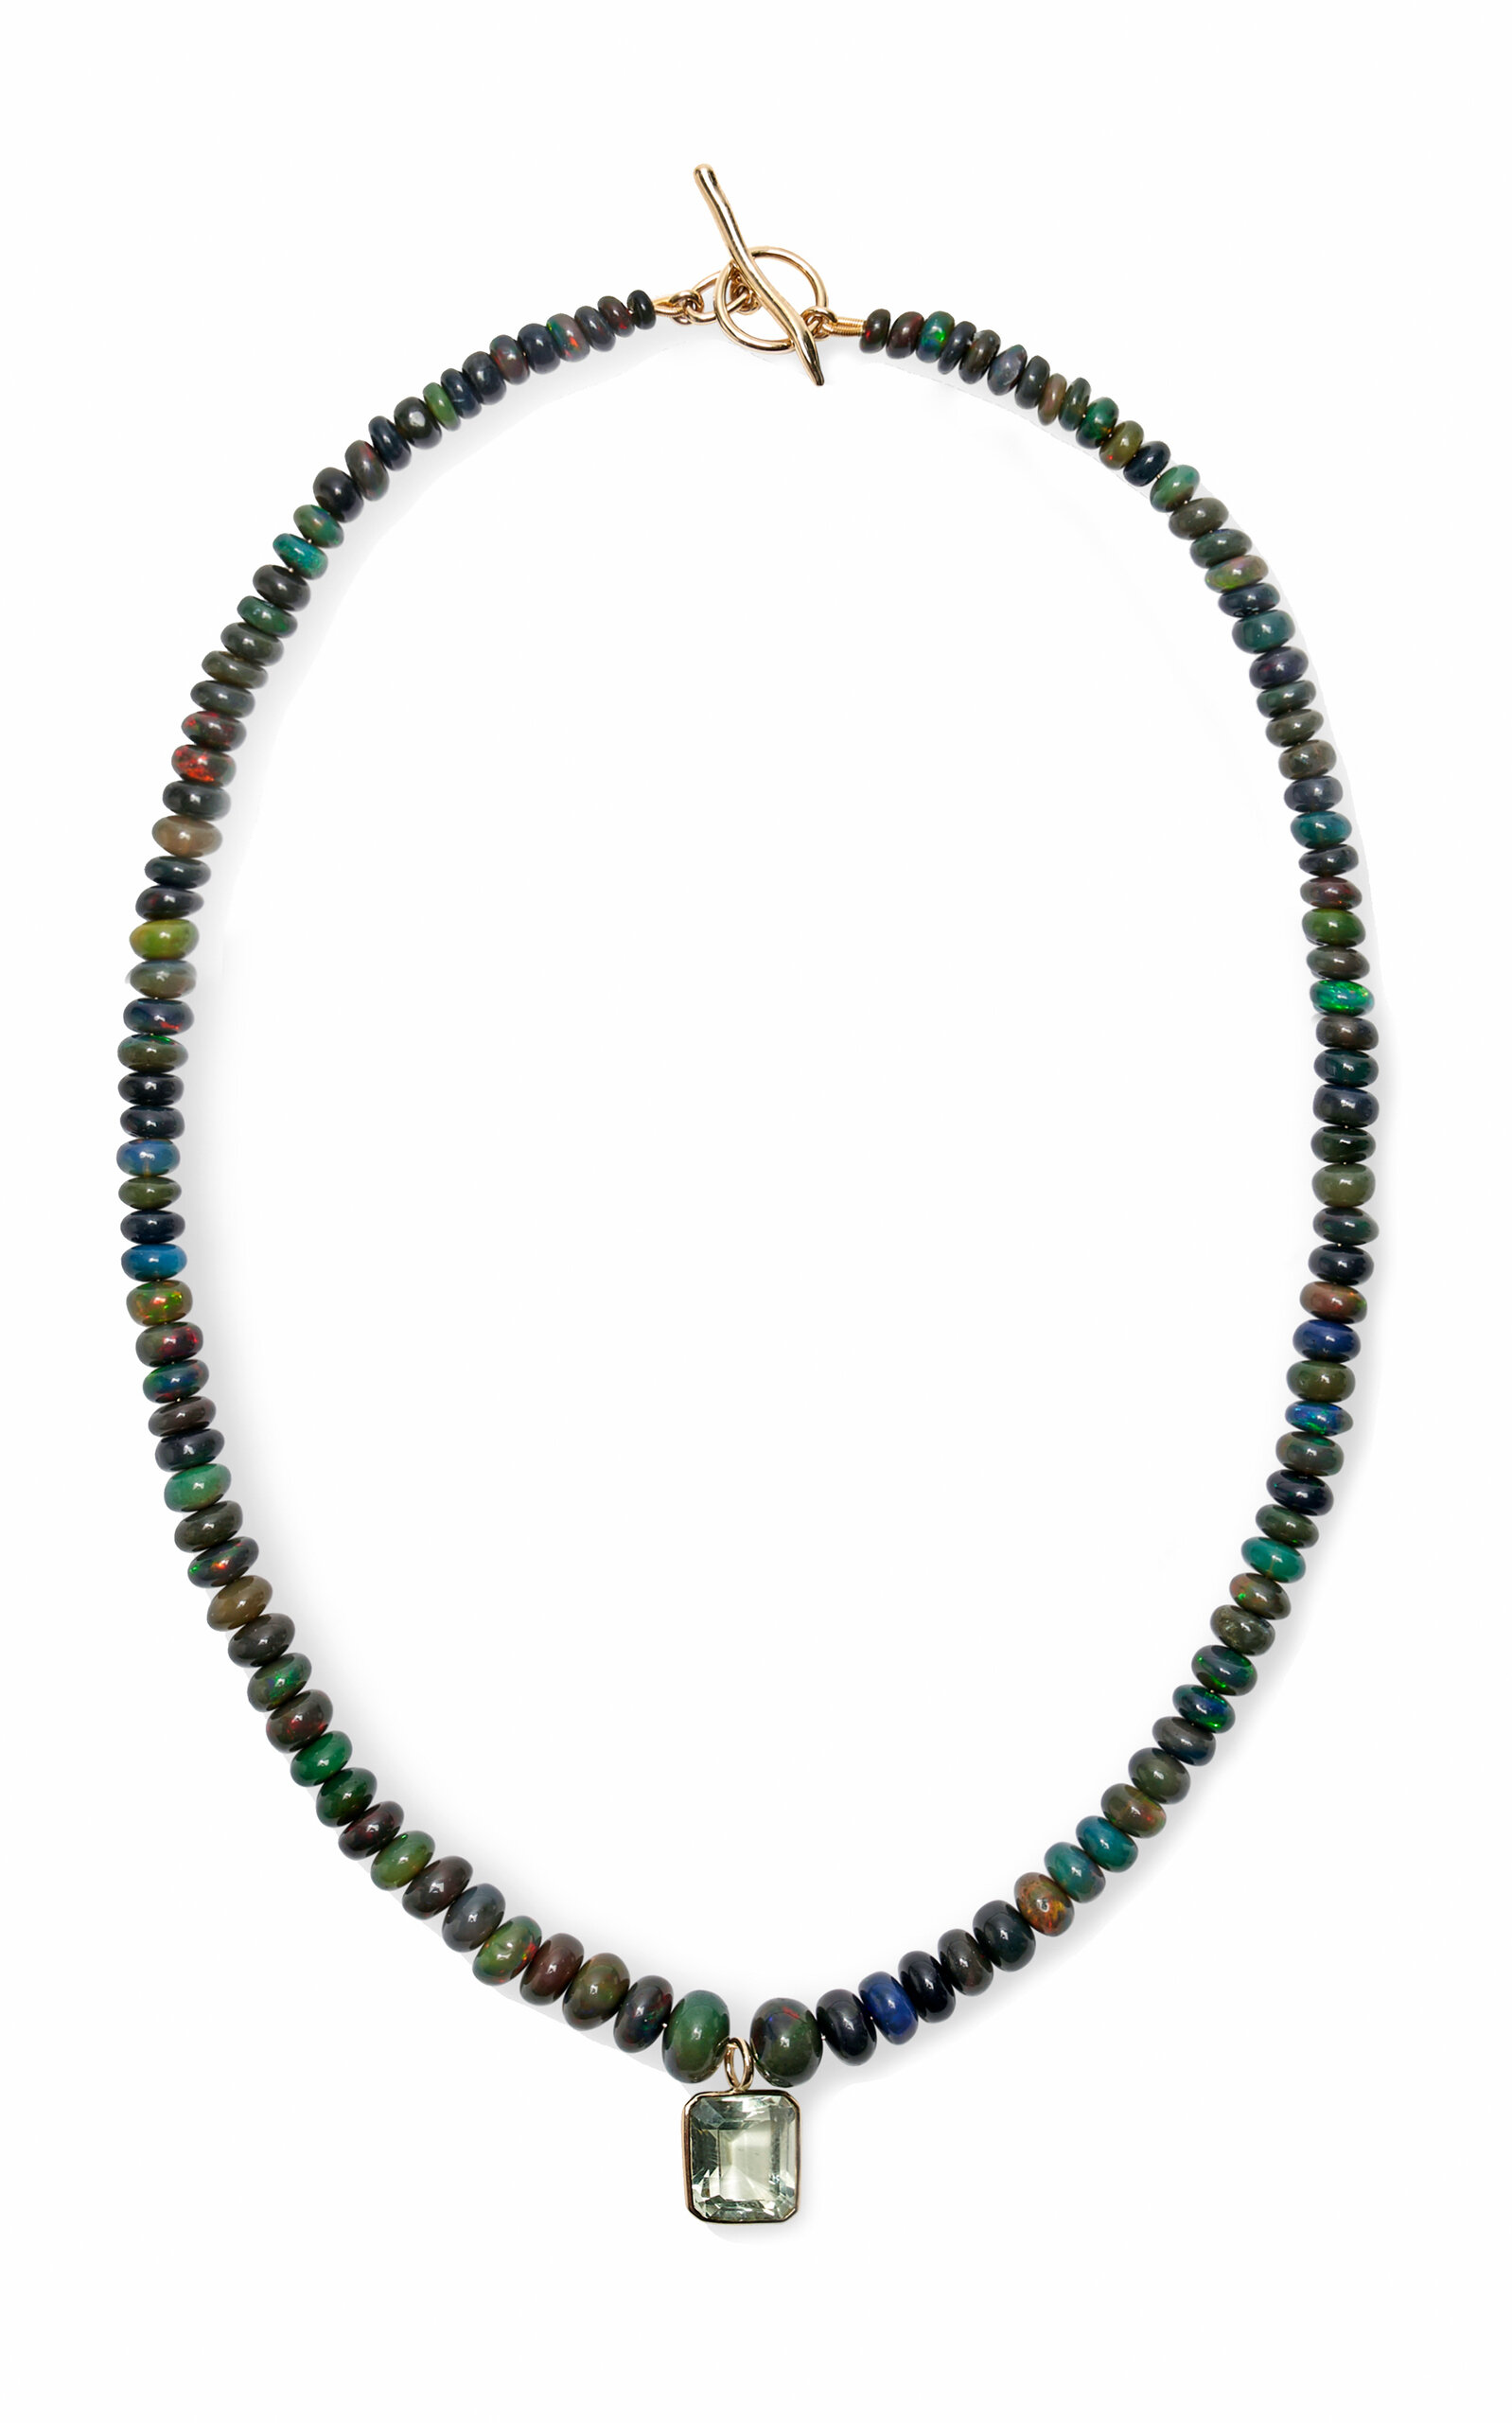 Exclusive Black Opal; Green Amethyst and 14k Gold Charm Necklace